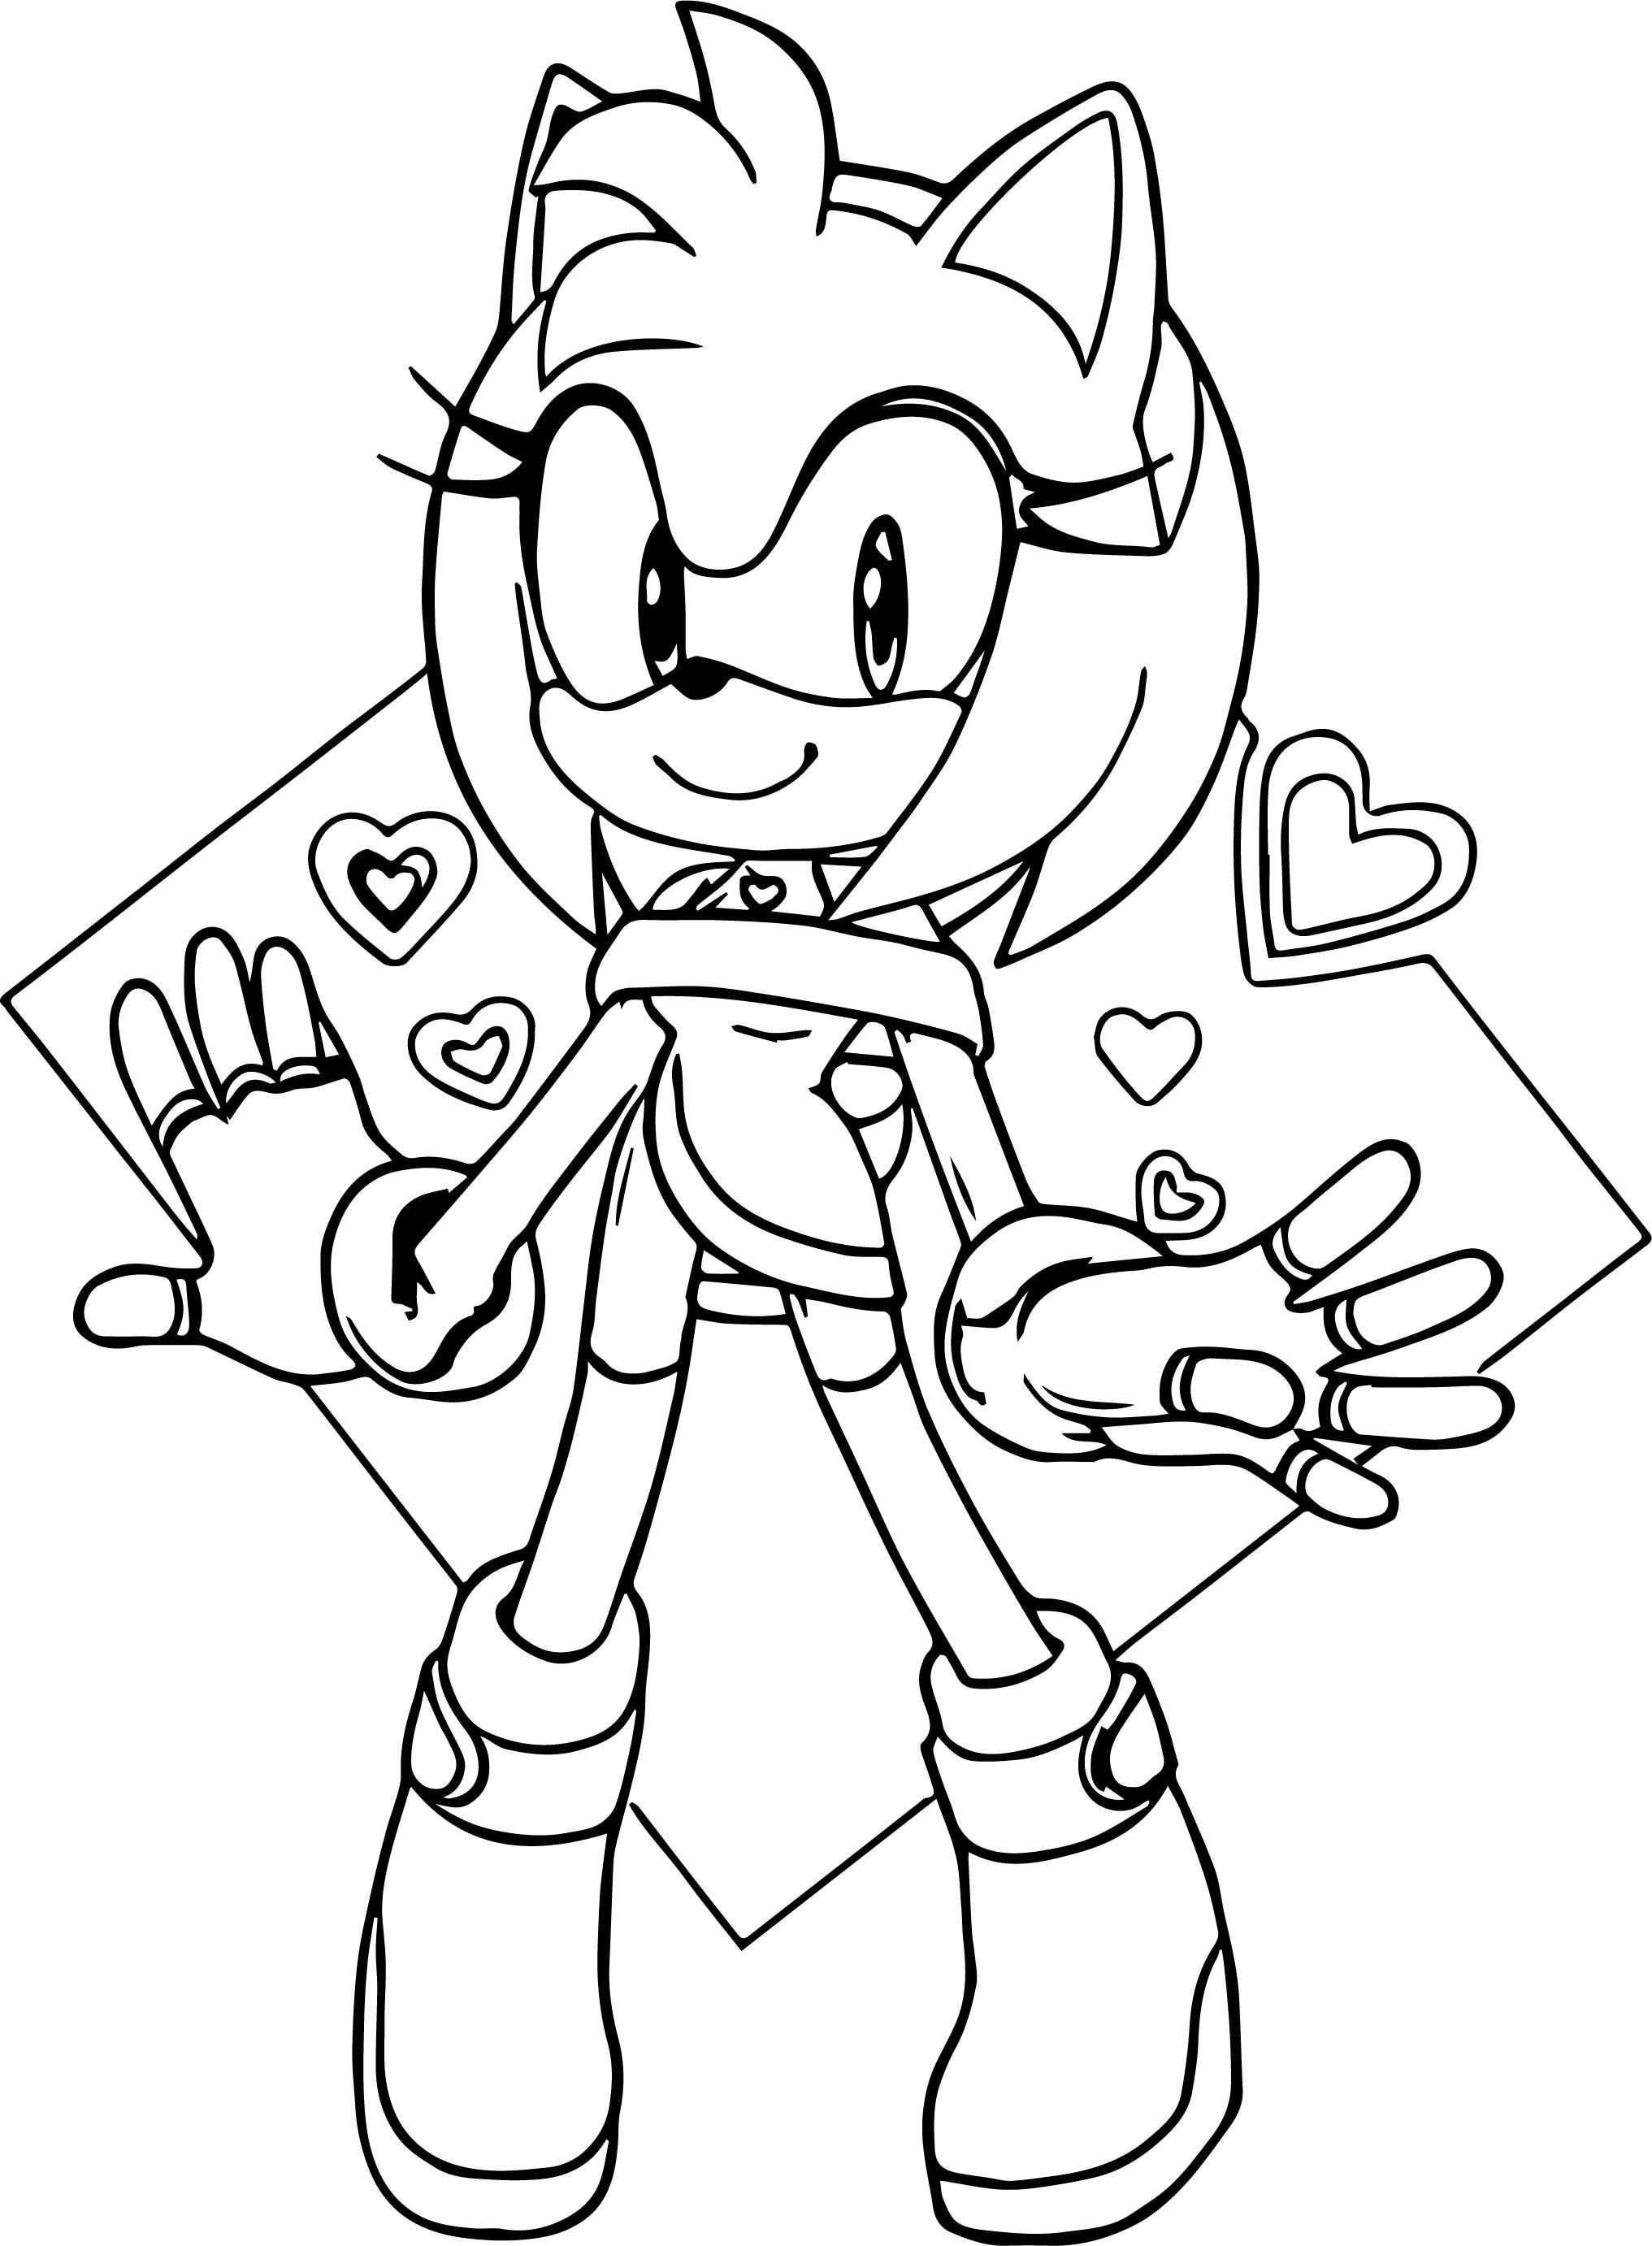 Cool zealous amy rose coloring page rose coloring pages monster coloring pages sailor mooâ sailor moon coloring pages rose coloring pages monster coloring pages